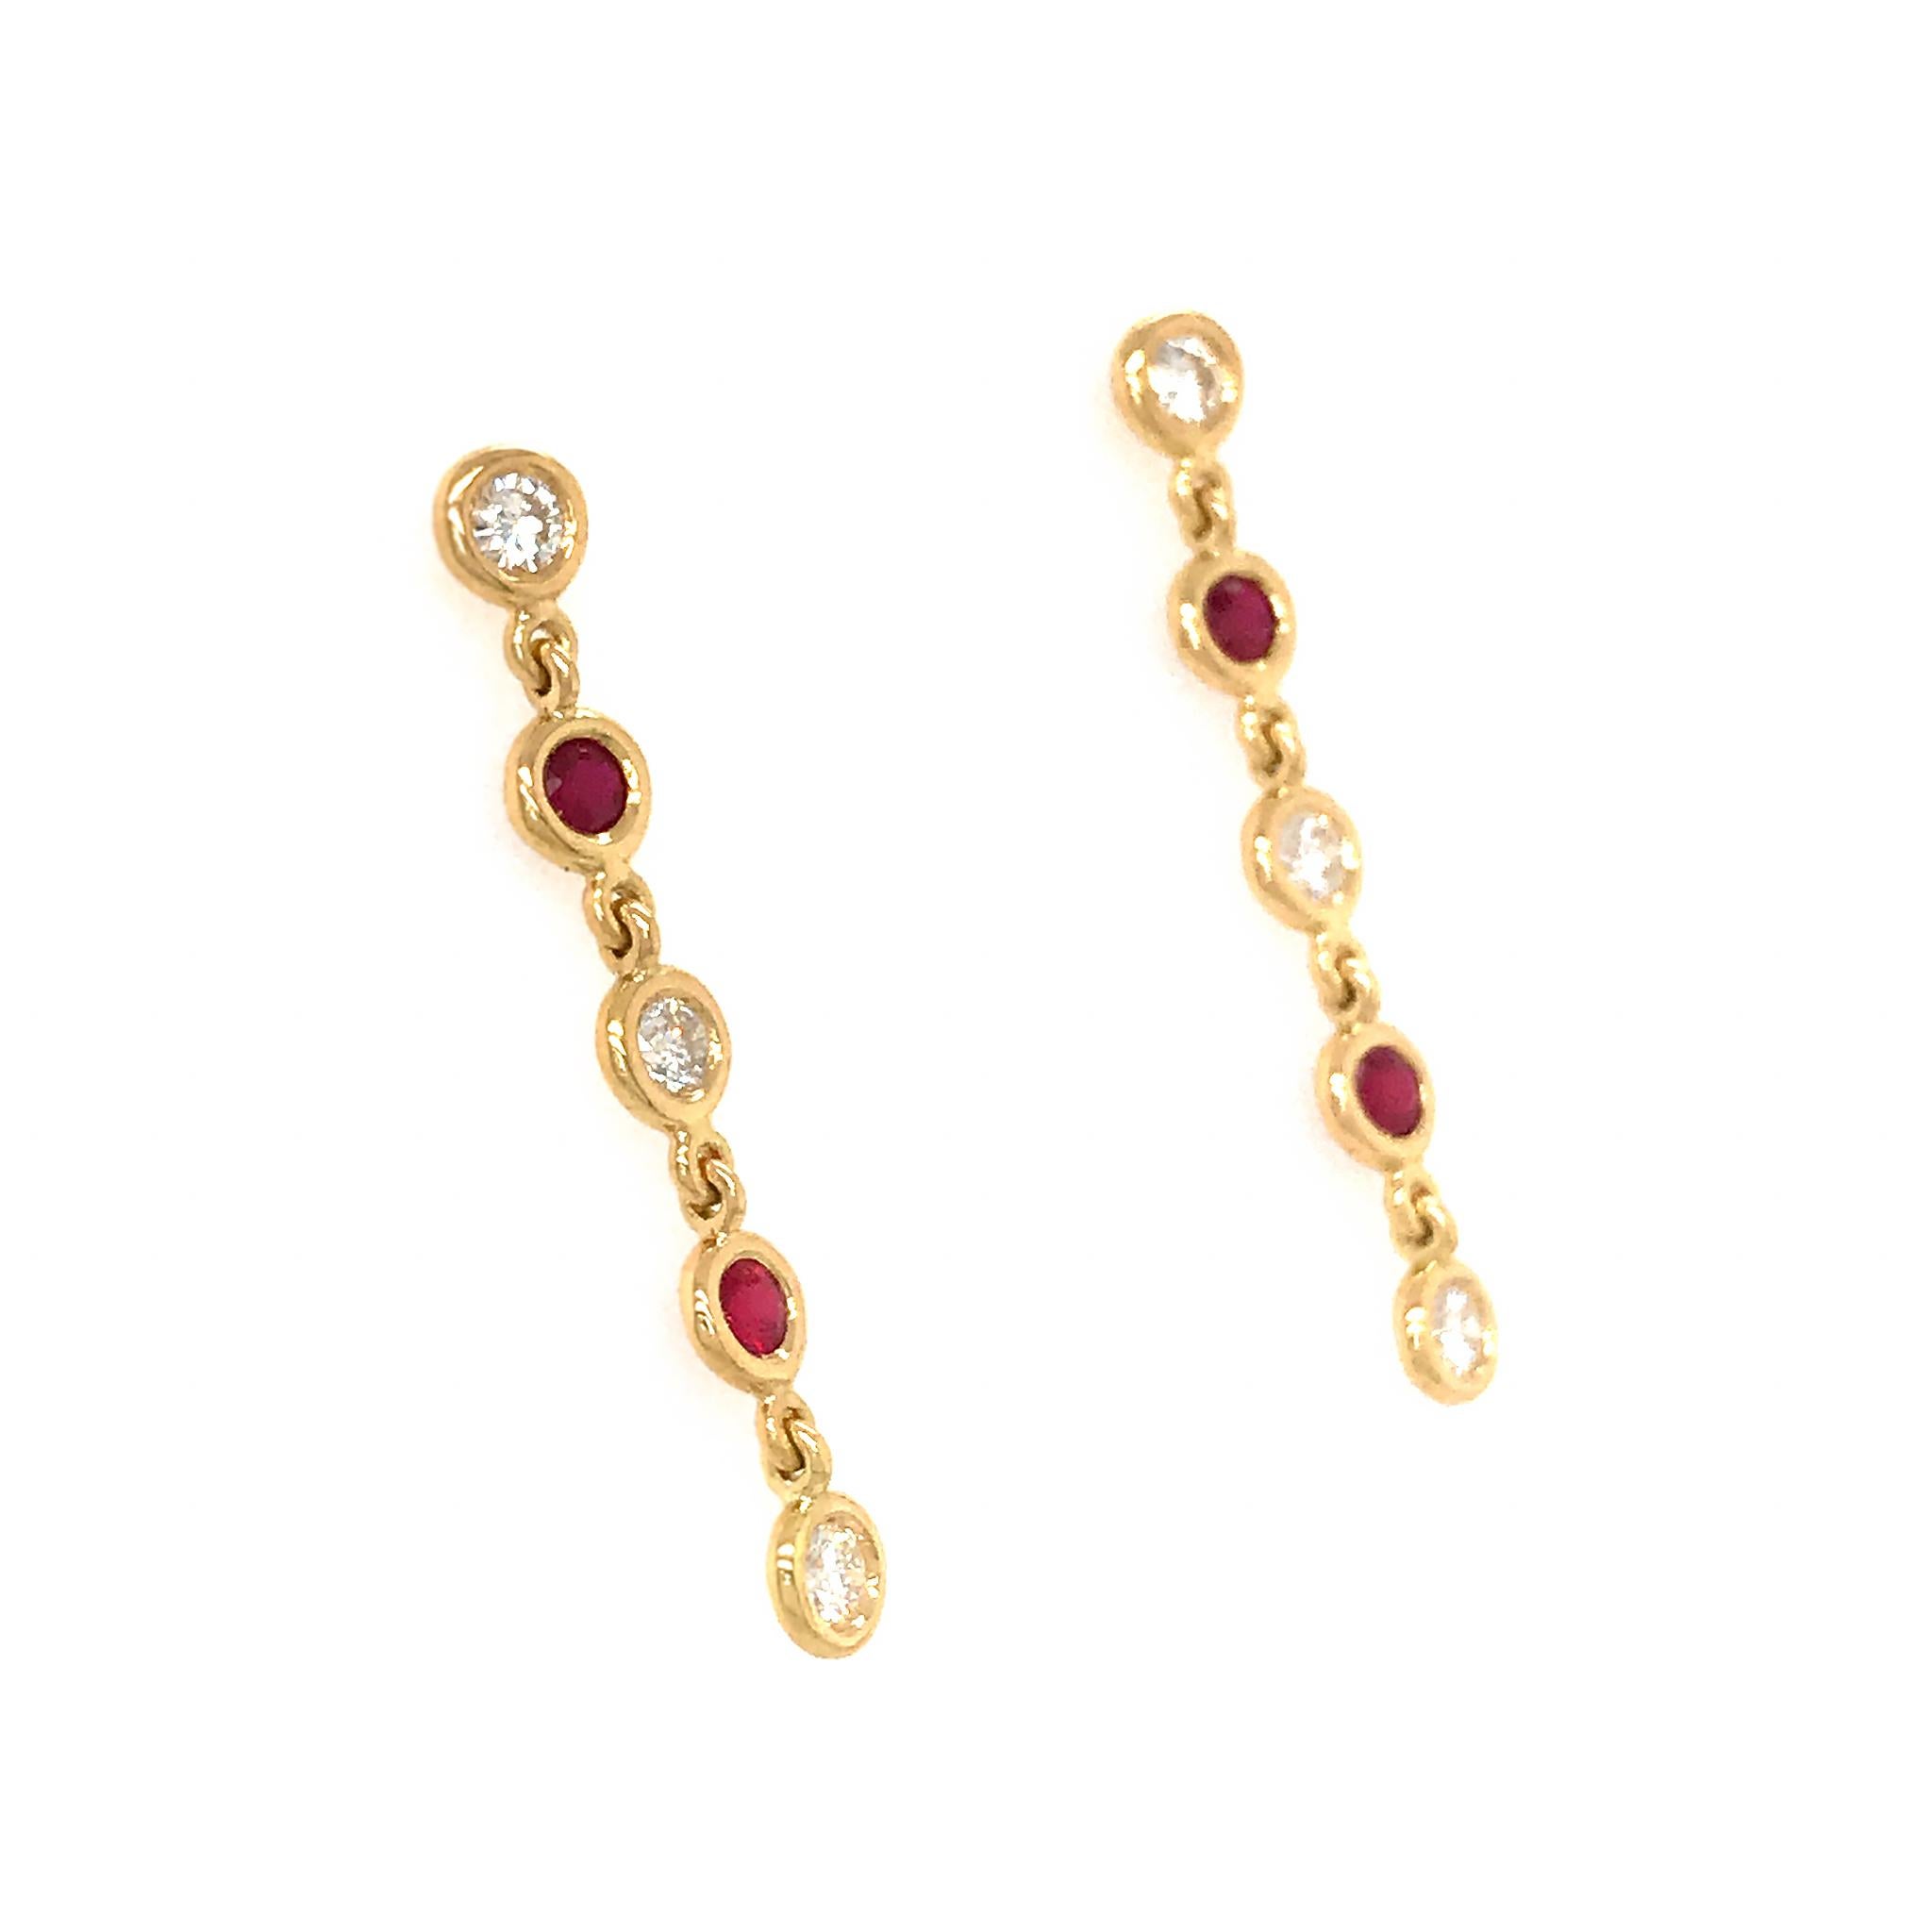 METAL TYPE: 18k Yellow Gold
STONE WEIGHT: RUBY = 0.53ct twd 
                             DIAMOND = 0.62ct twd
TOTAL WEIGHT: 3.4 grams
EARRINGS LENGTH: 1.5 inches